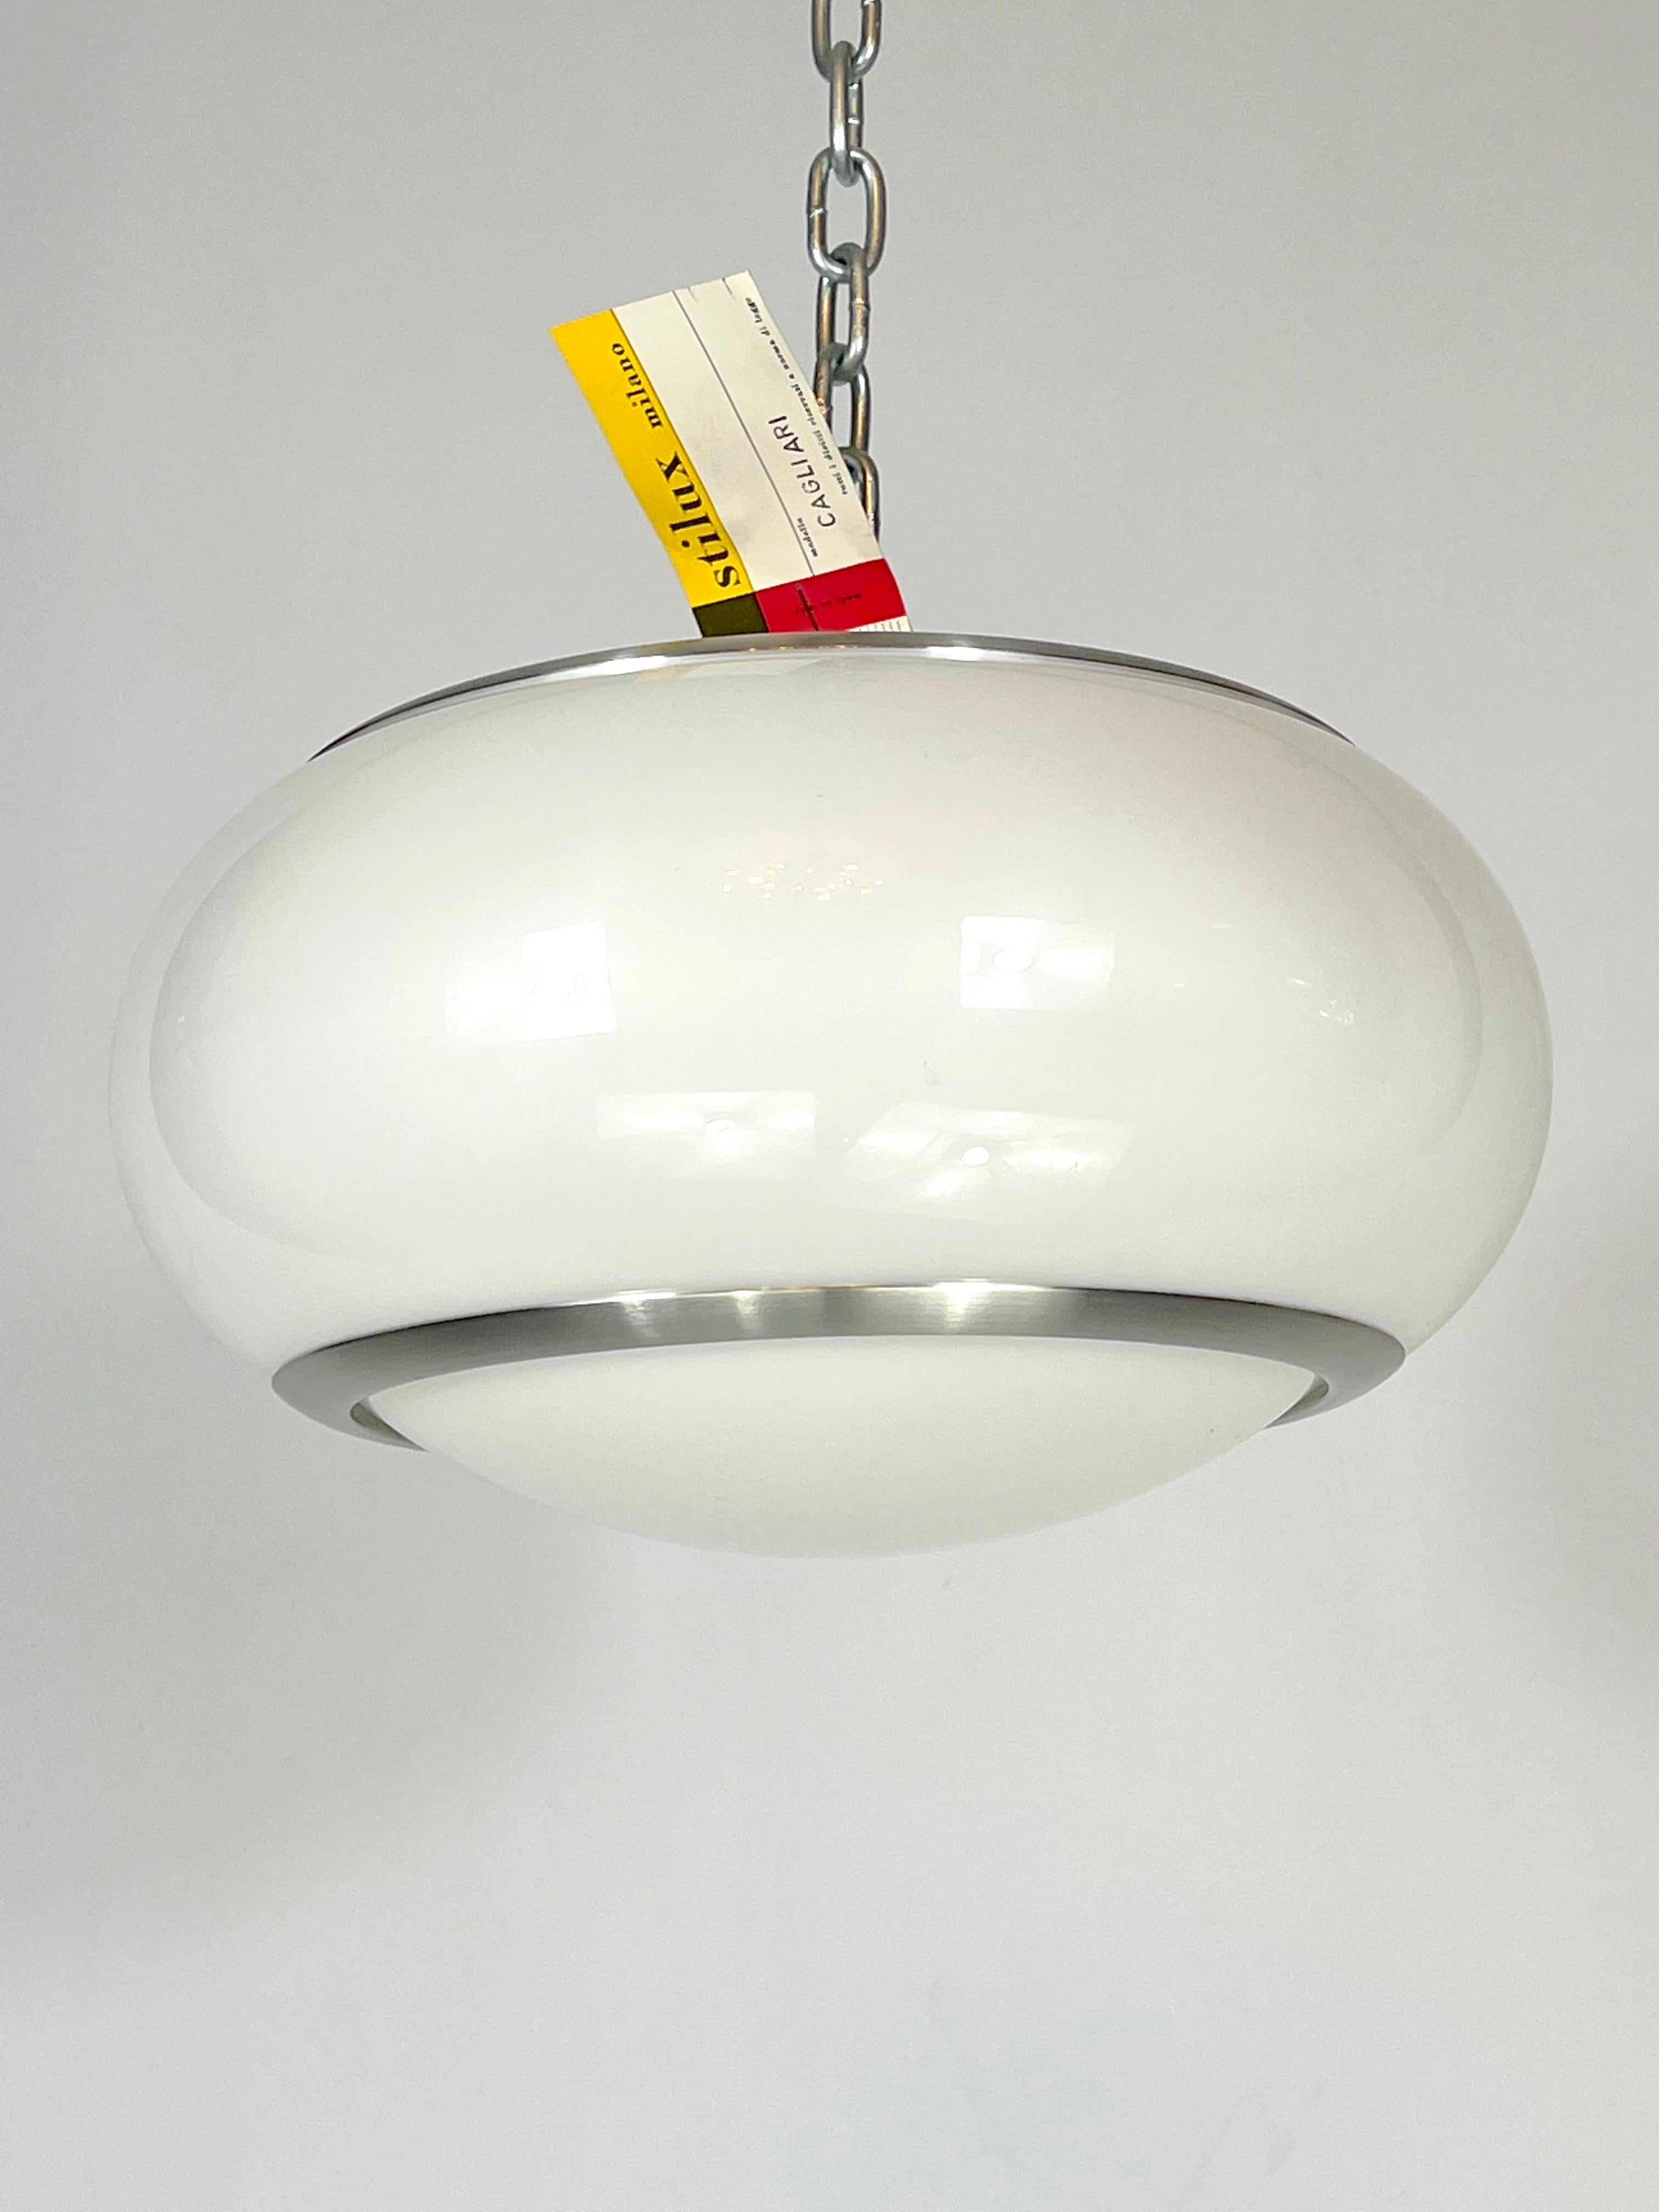 Exeptional condition for this stock fund ceiling lamp produced by Stilux Milano and made from brushed aluminum and perspex. Original label and tag of manufacturing. Full working with EU standard, adaptable on demand for USA standard.